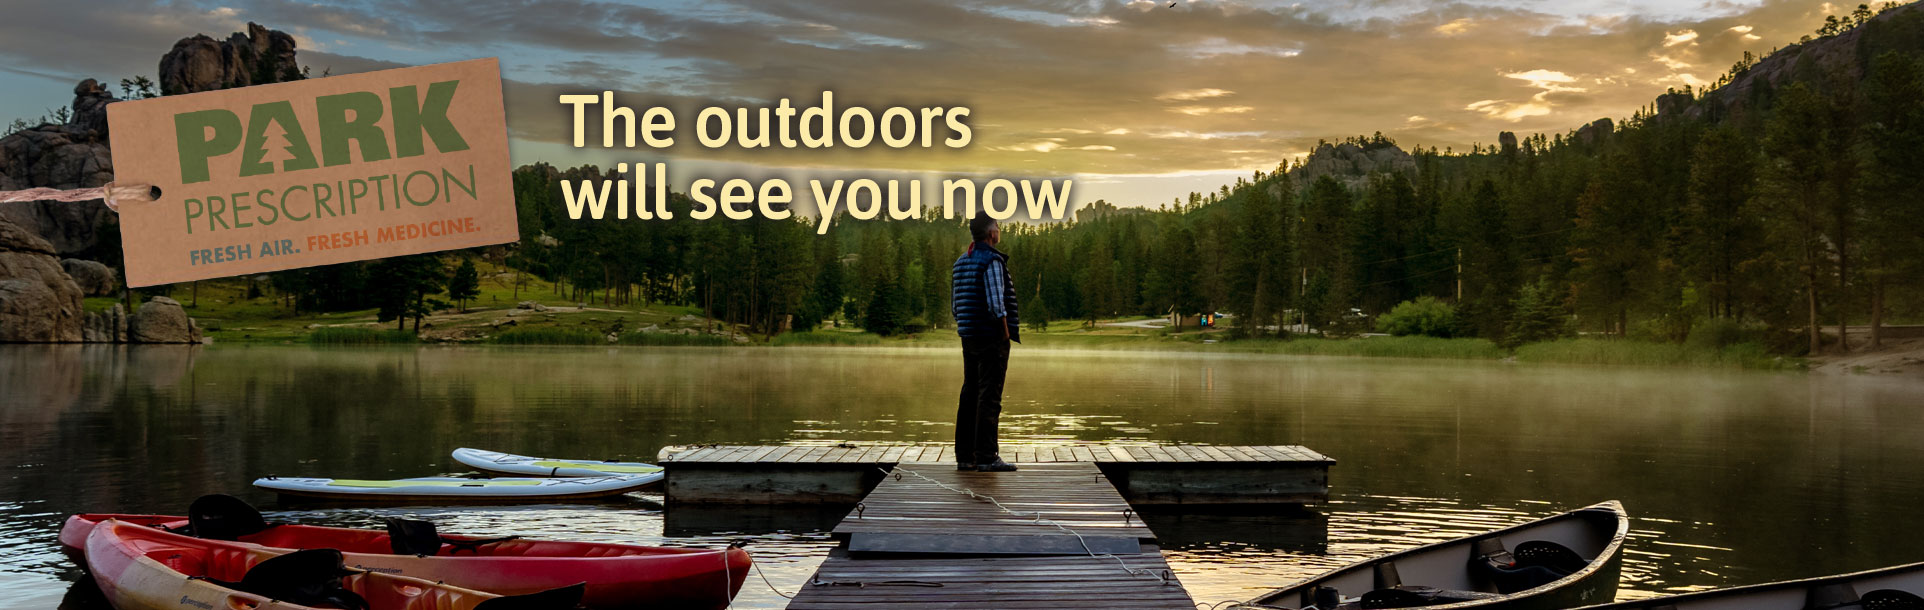 The Outdoors will see you now